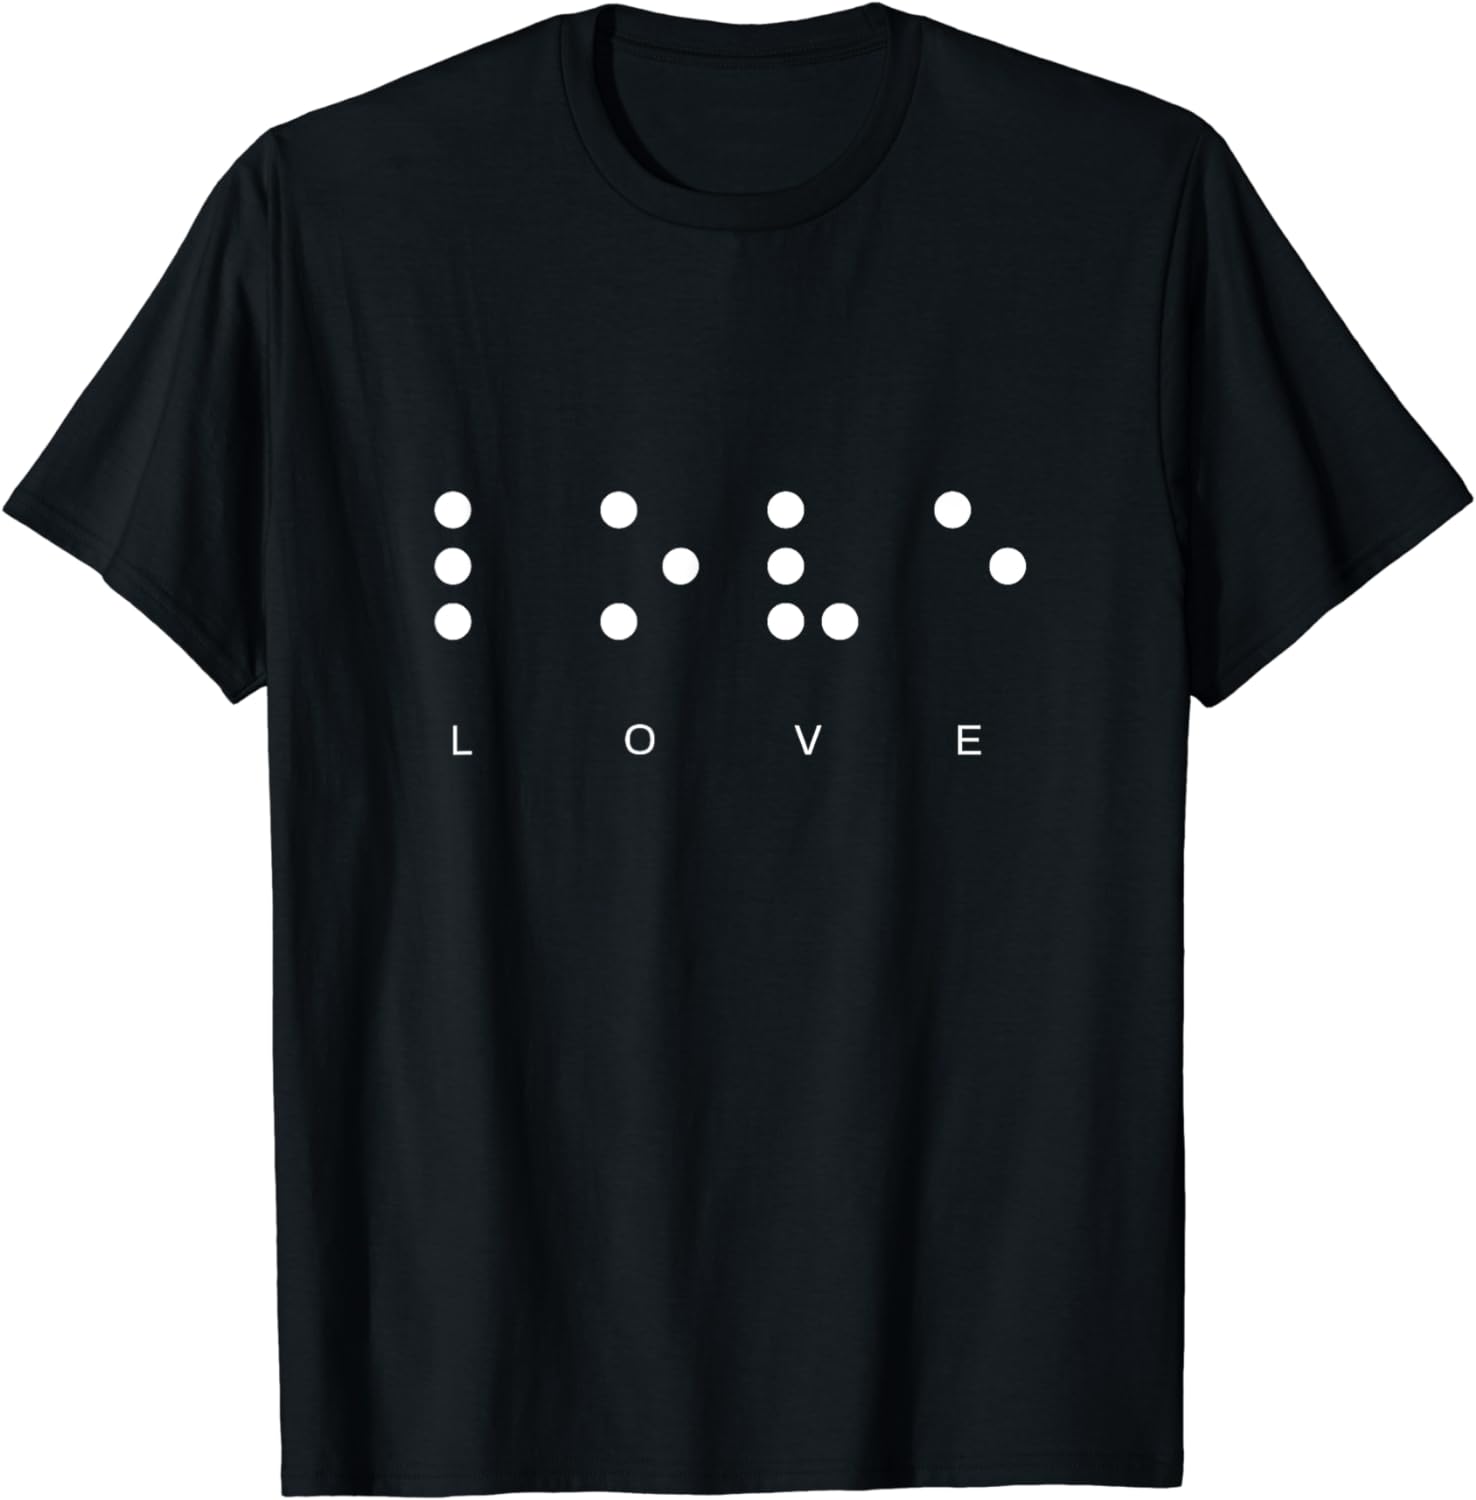 Love In Braille Words For The Blind And Visually Impaired T-Shirt ...